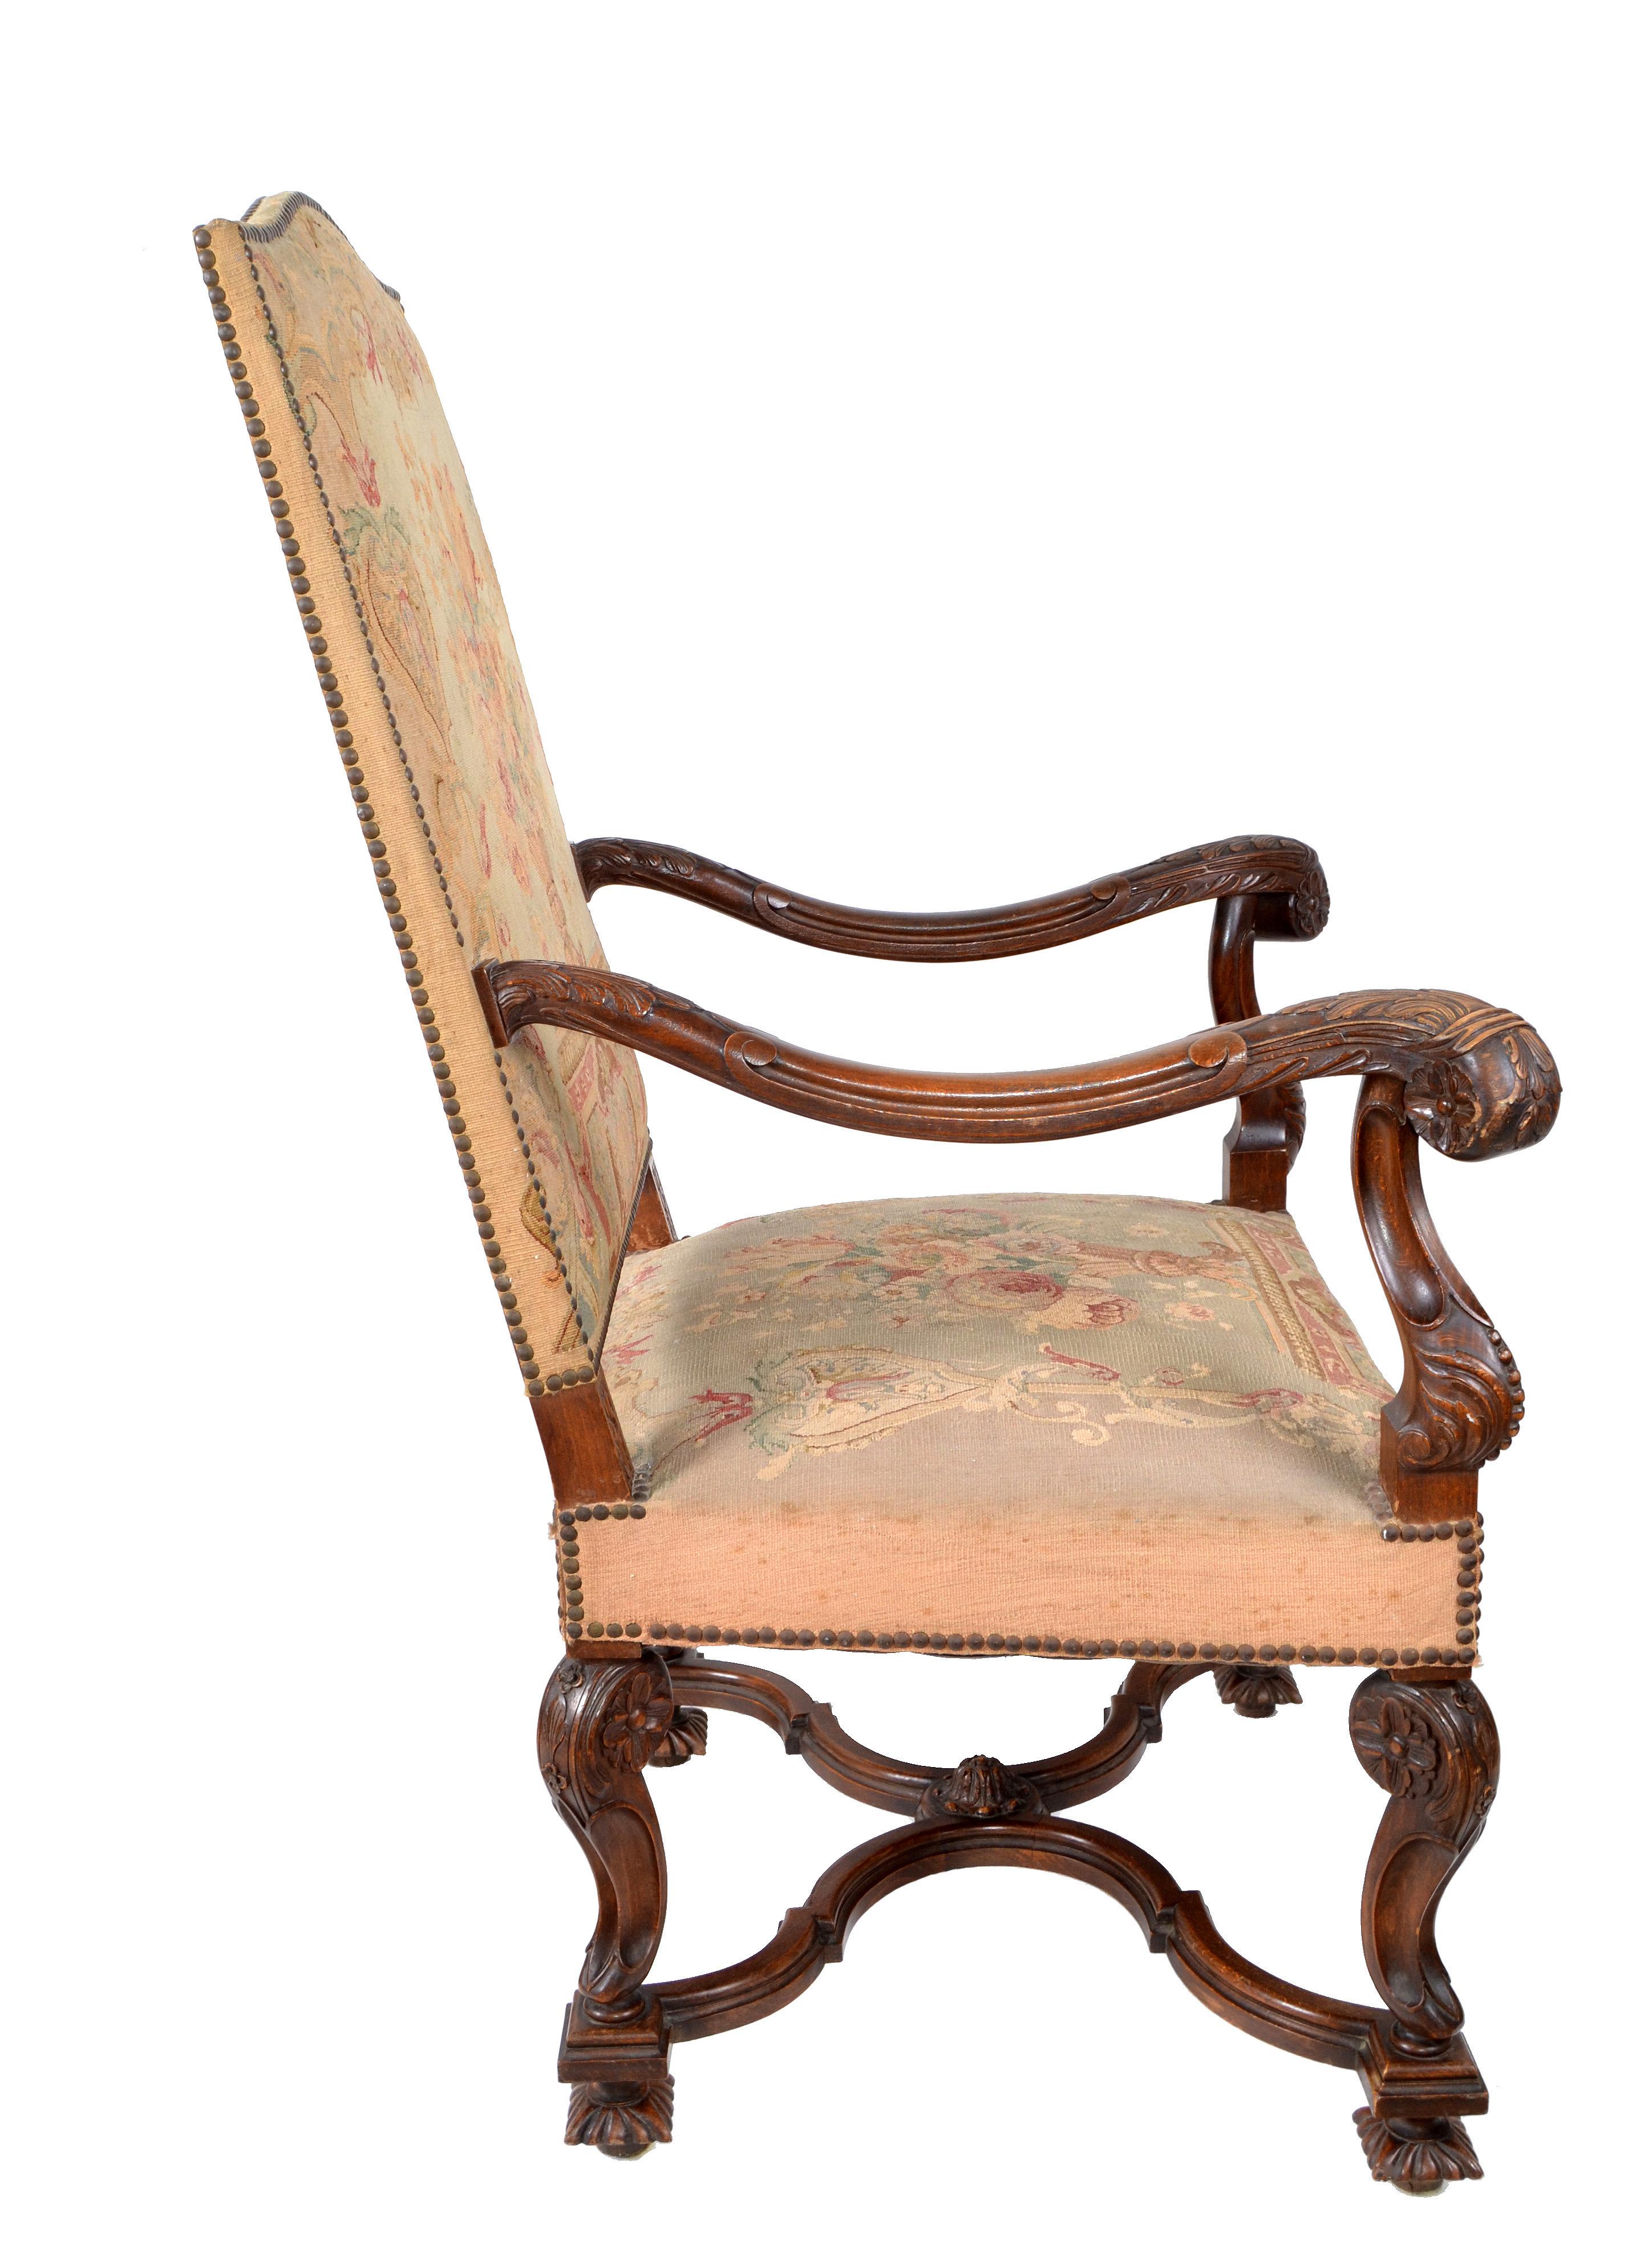 Rococo 17th Century Hand Carved Walnut Wood Armchair Needlepoint Upholstery Cross Base For Sale